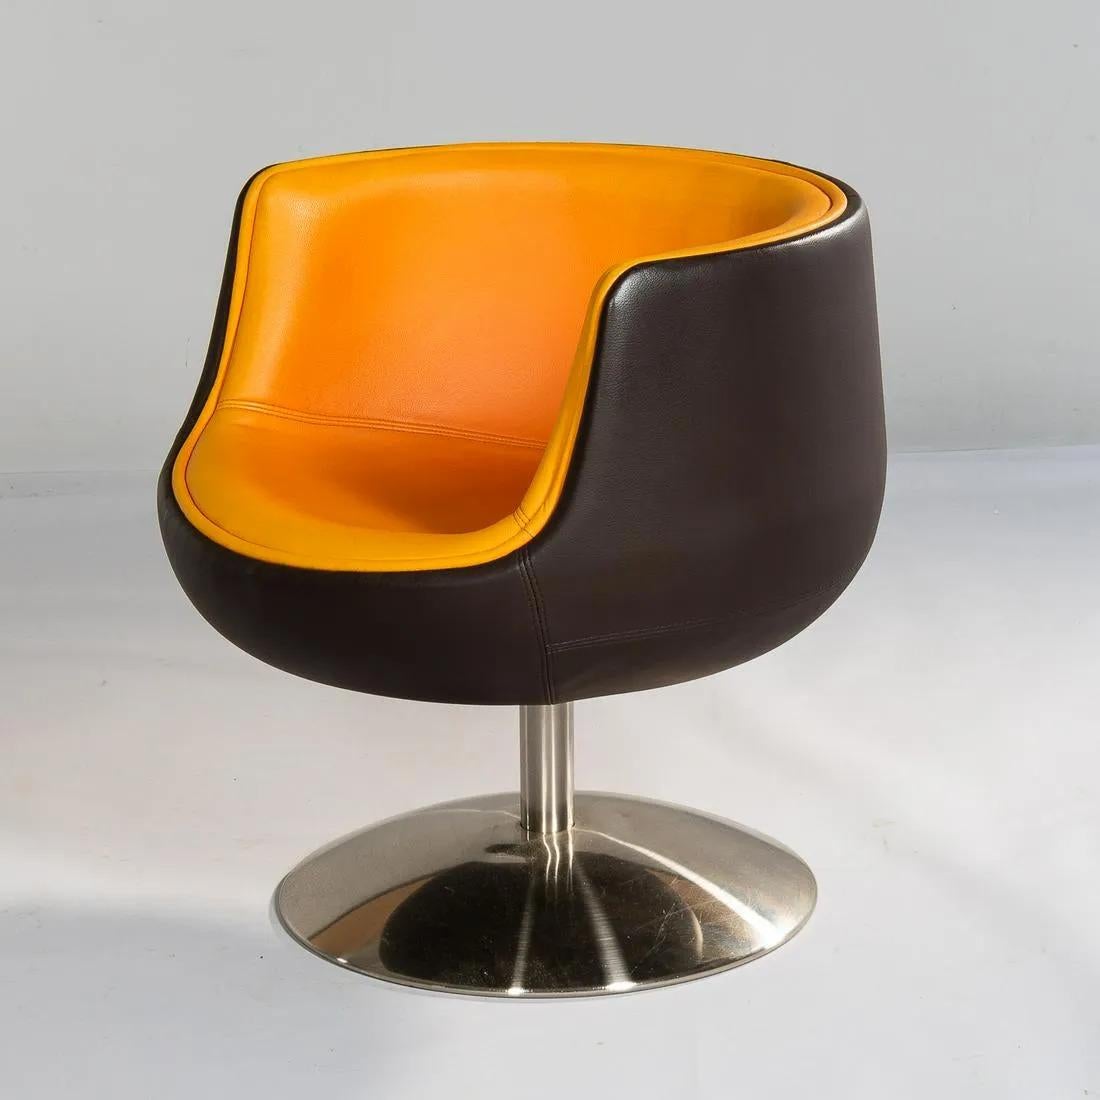 1960s Mid-Century Modern Leather Swivel Chair In Good Condition For Sale In Downingtown, PA